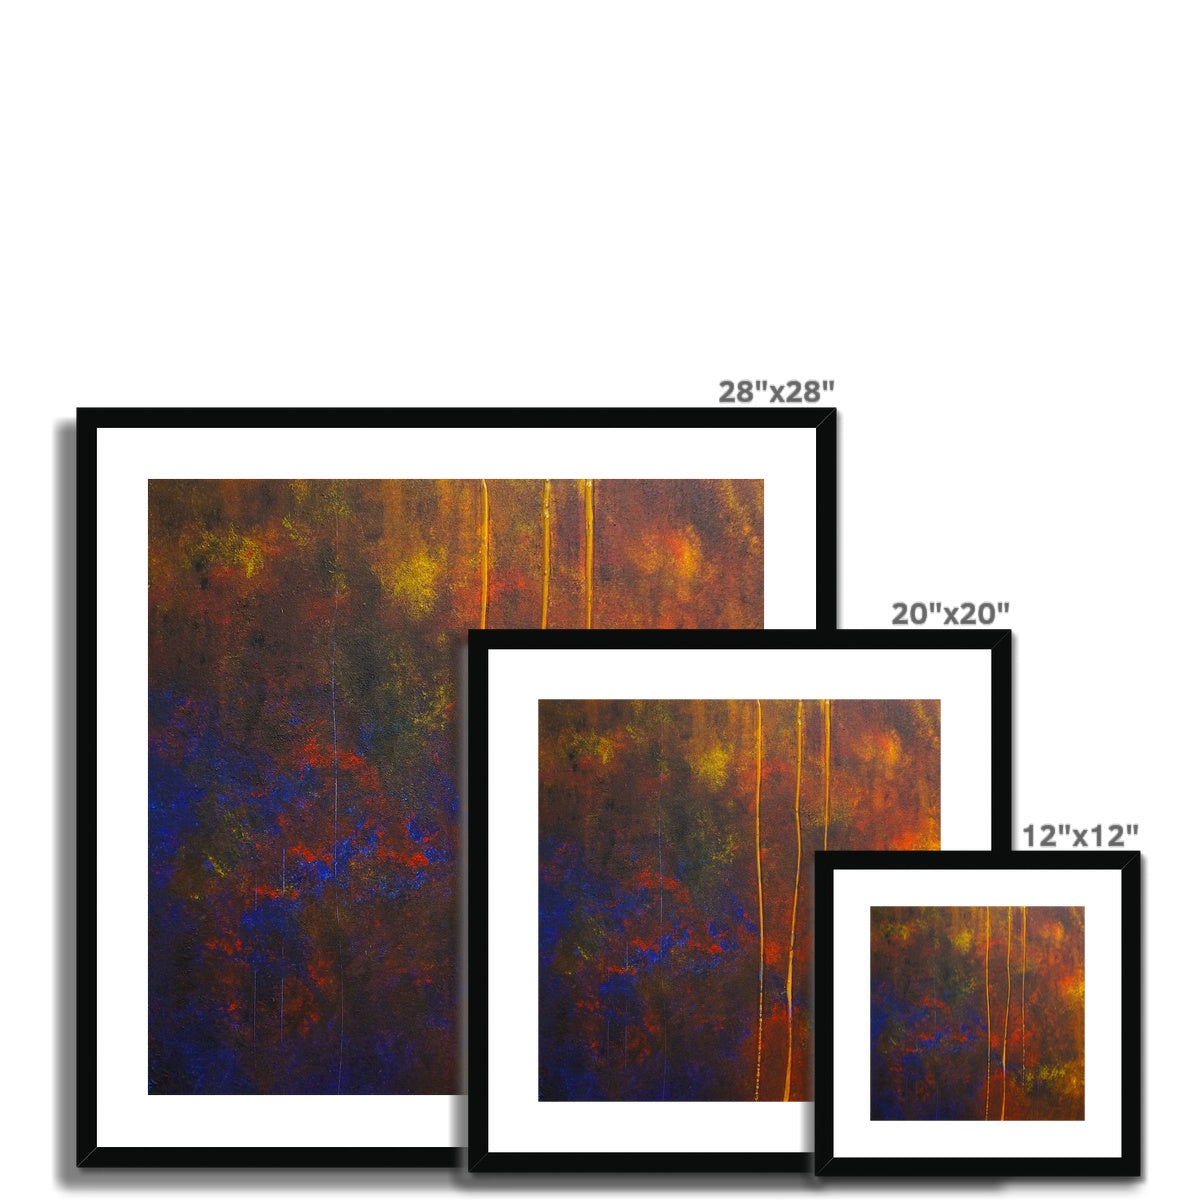 The Autumn Wood Abstract Painting | Framed & Mounted Prints From Scotland-Framed & Mounted Prints-Abstract & Impressionistic Art Gallery-Paintings, Prints, Homeware, Art Gifts From Scotland By Scottish Artist Kevin Hunter